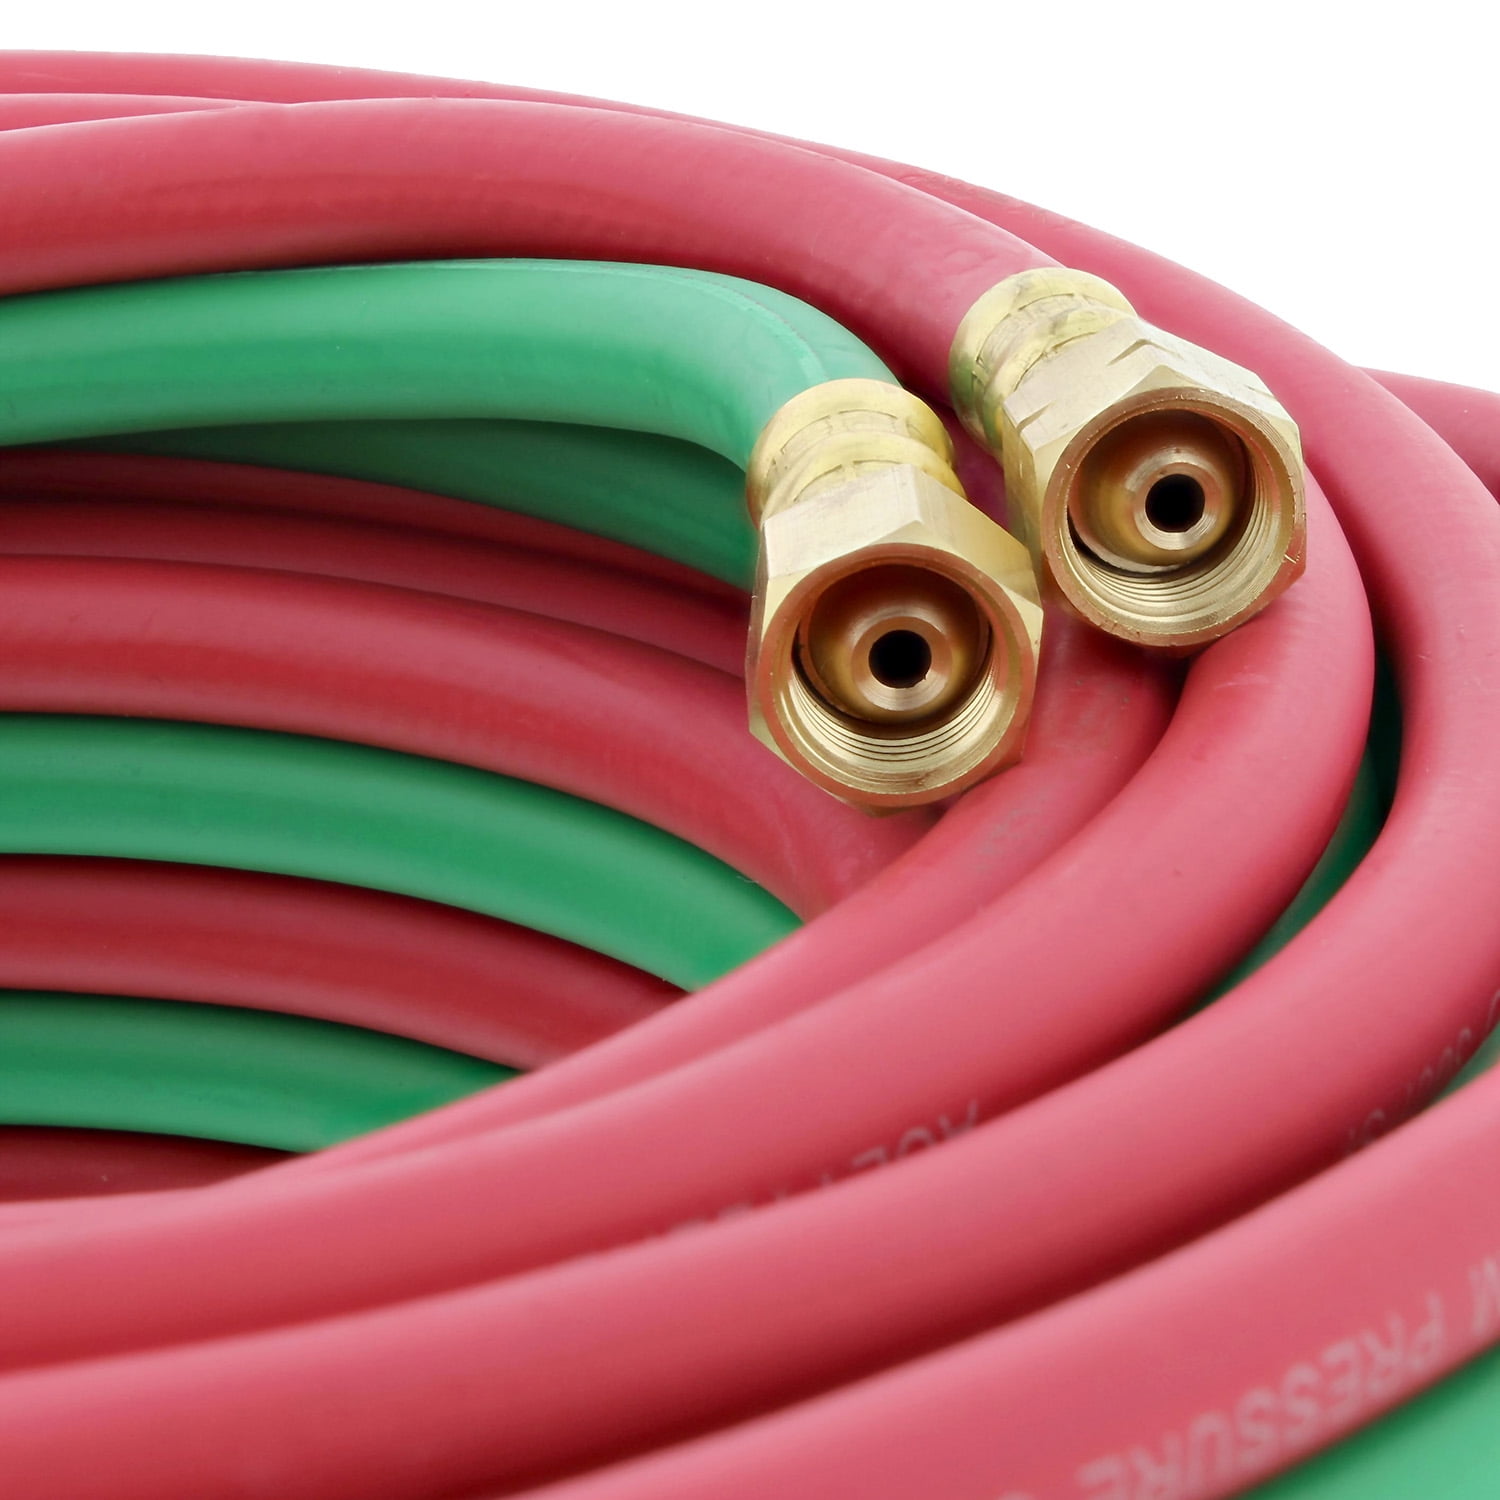 Acetylene and Oxygen Hoses 25 and 1/4 Fittings Kink Proof Gas Hoses Heavy Duty 300psi 